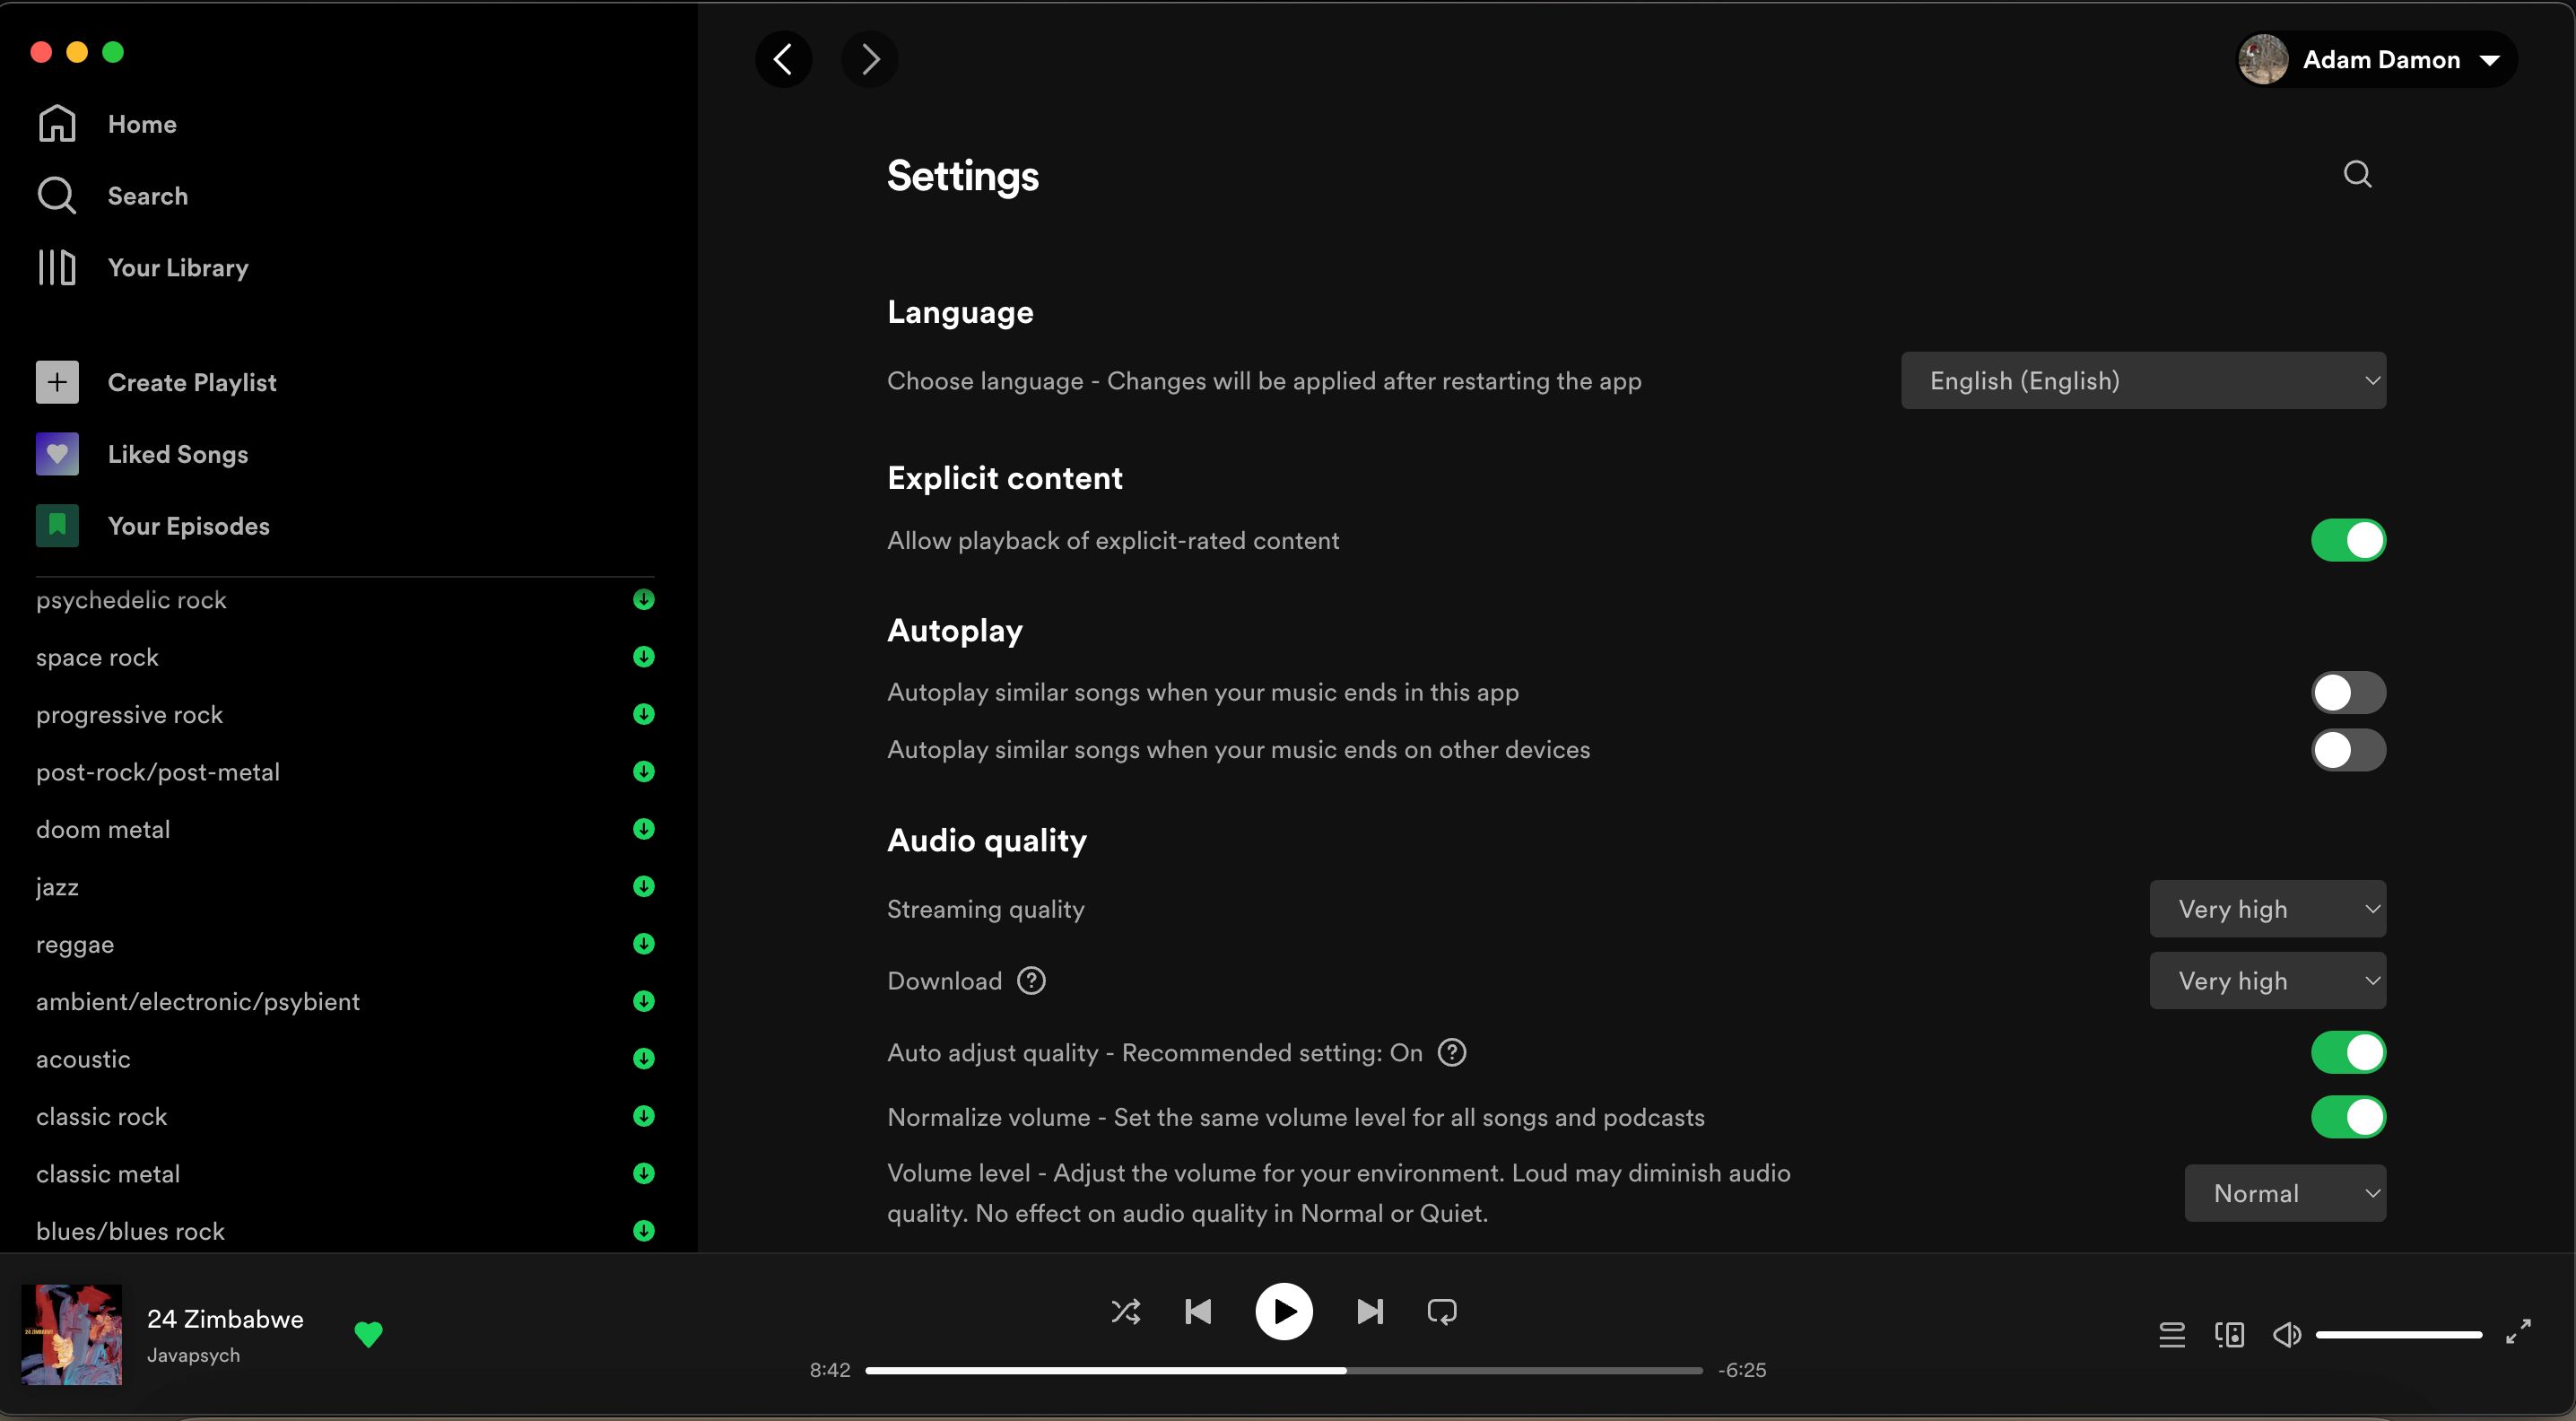 How To Change Language On Spotify